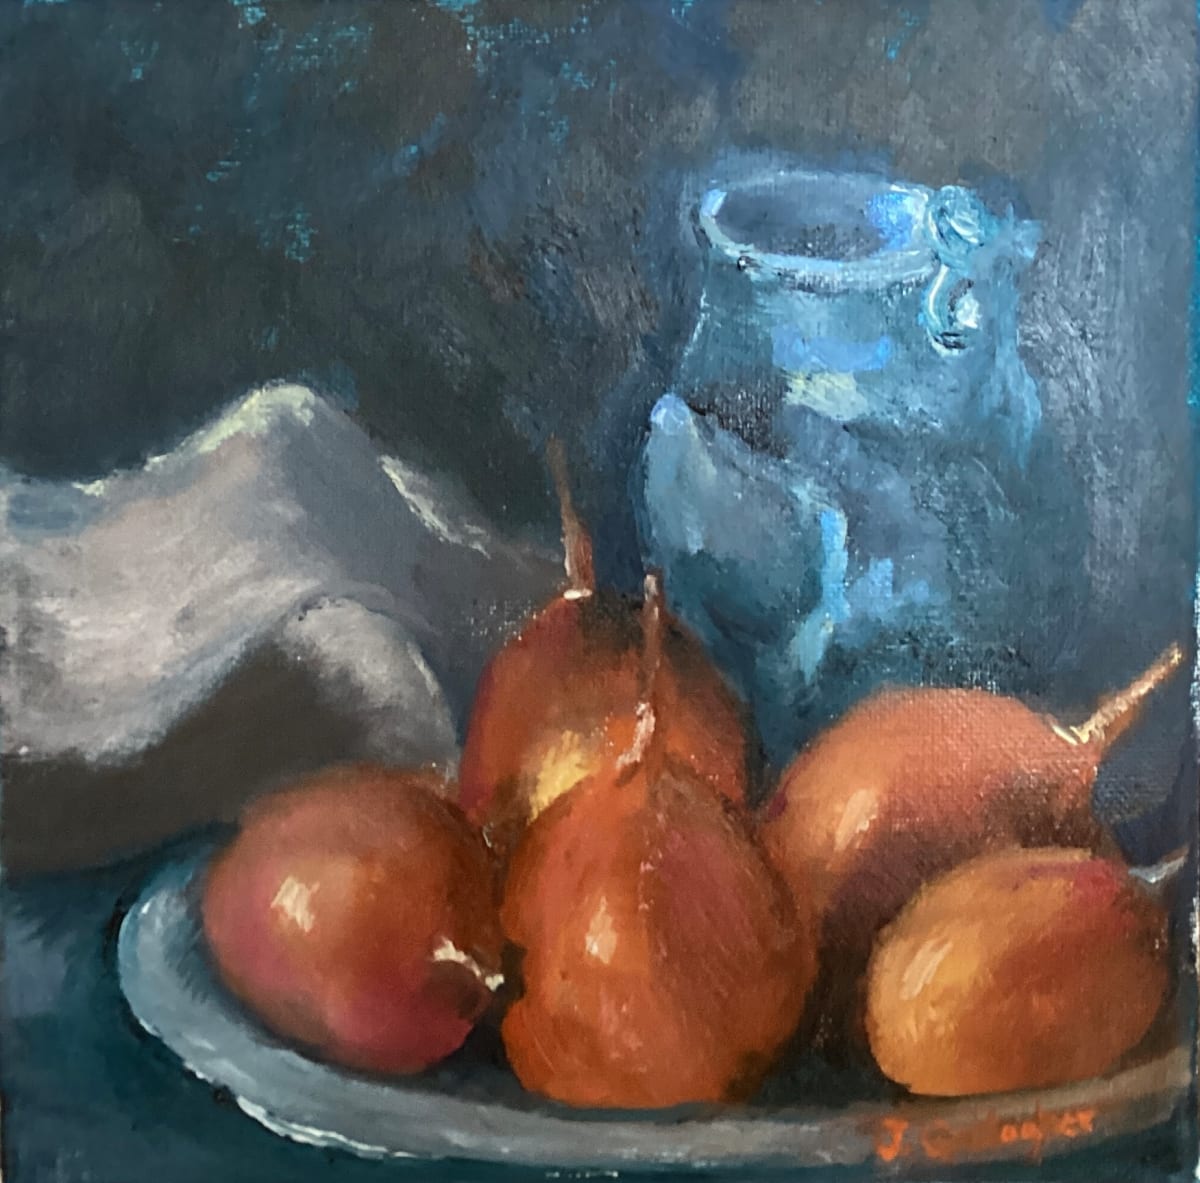 Malcolm’s Pears by Janet Gallagher  Image: Still life painting from a photograph